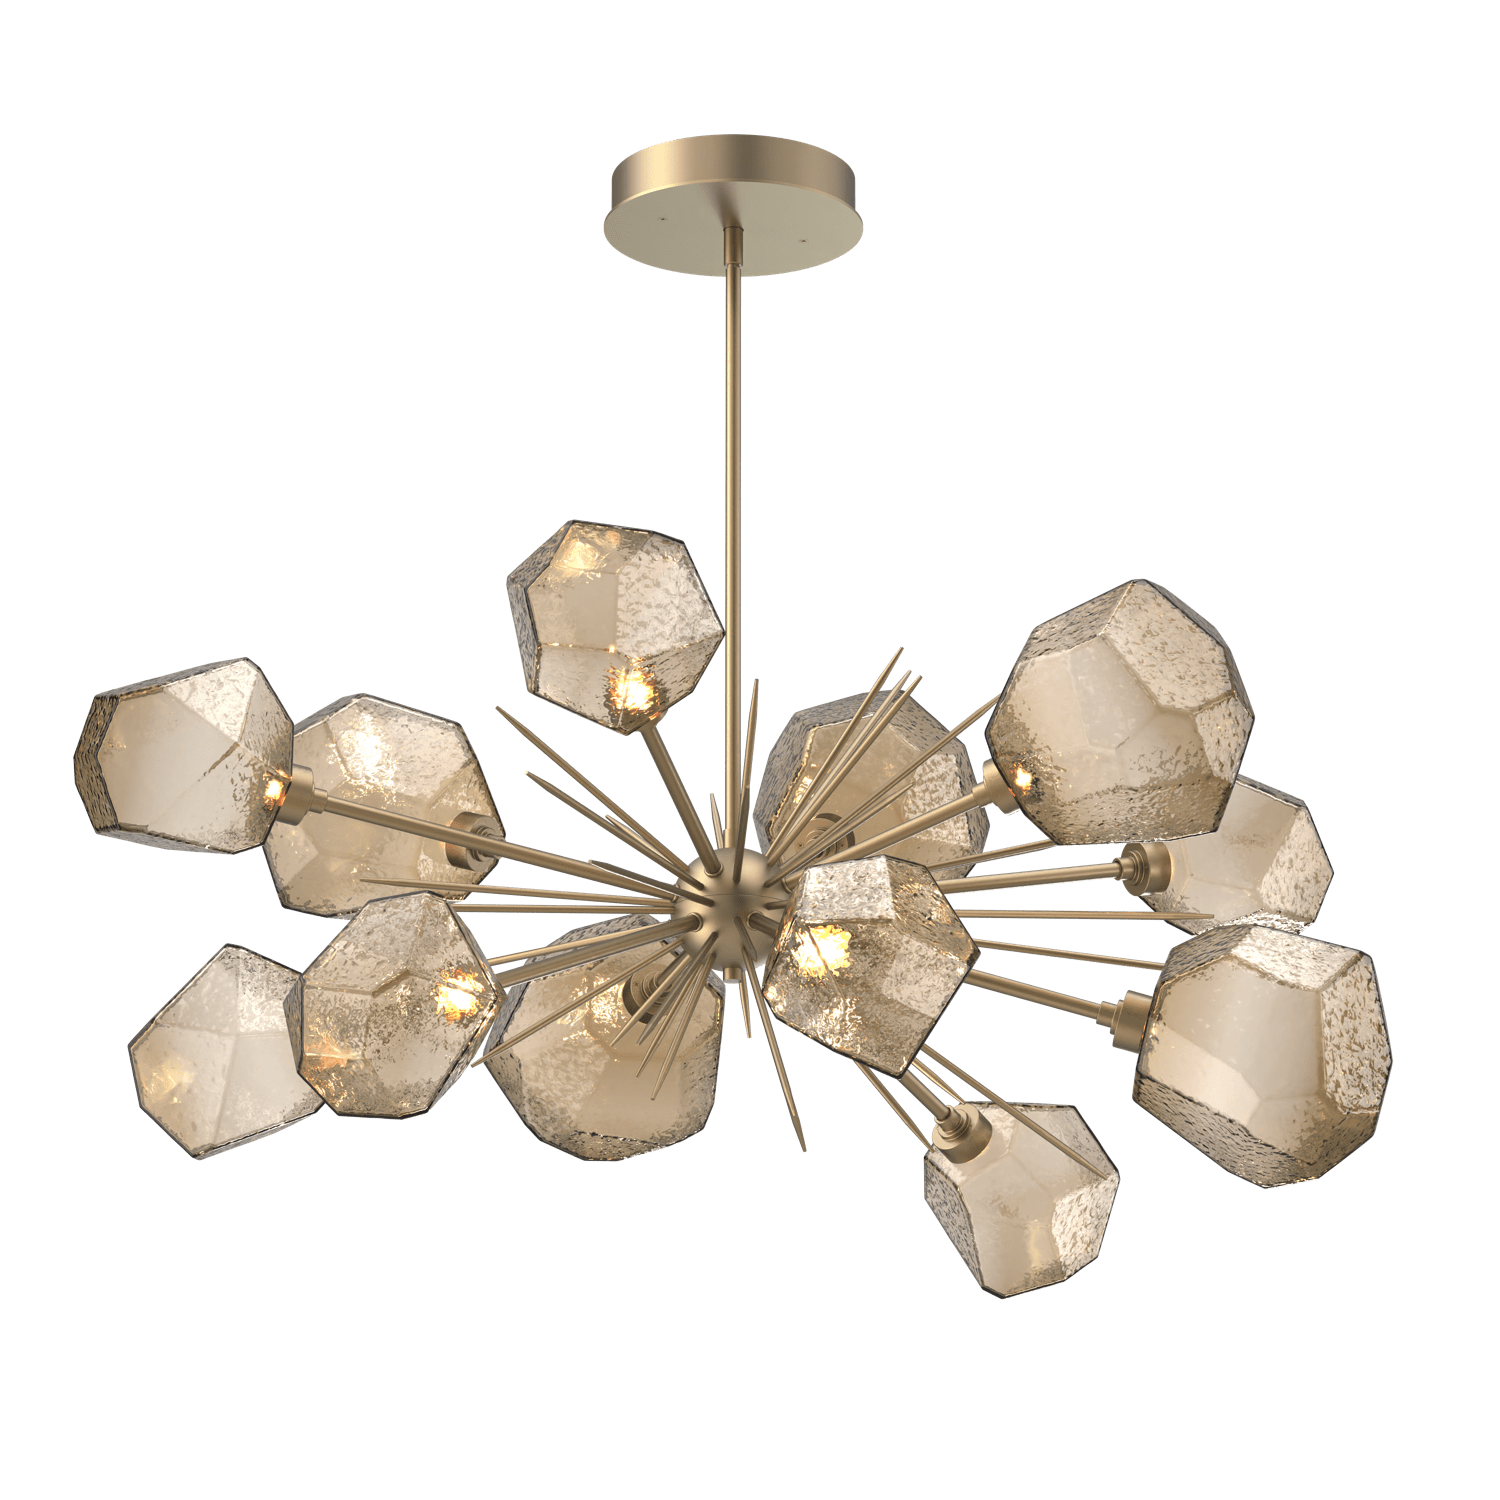 PLB0039-0D-GB-B-Hammerton-Studio-Gem-43-inch-oval-starburst-chandelier-with-gilded-brass-finish-and-bronze-blown-glass-shades-and-LED-lamping